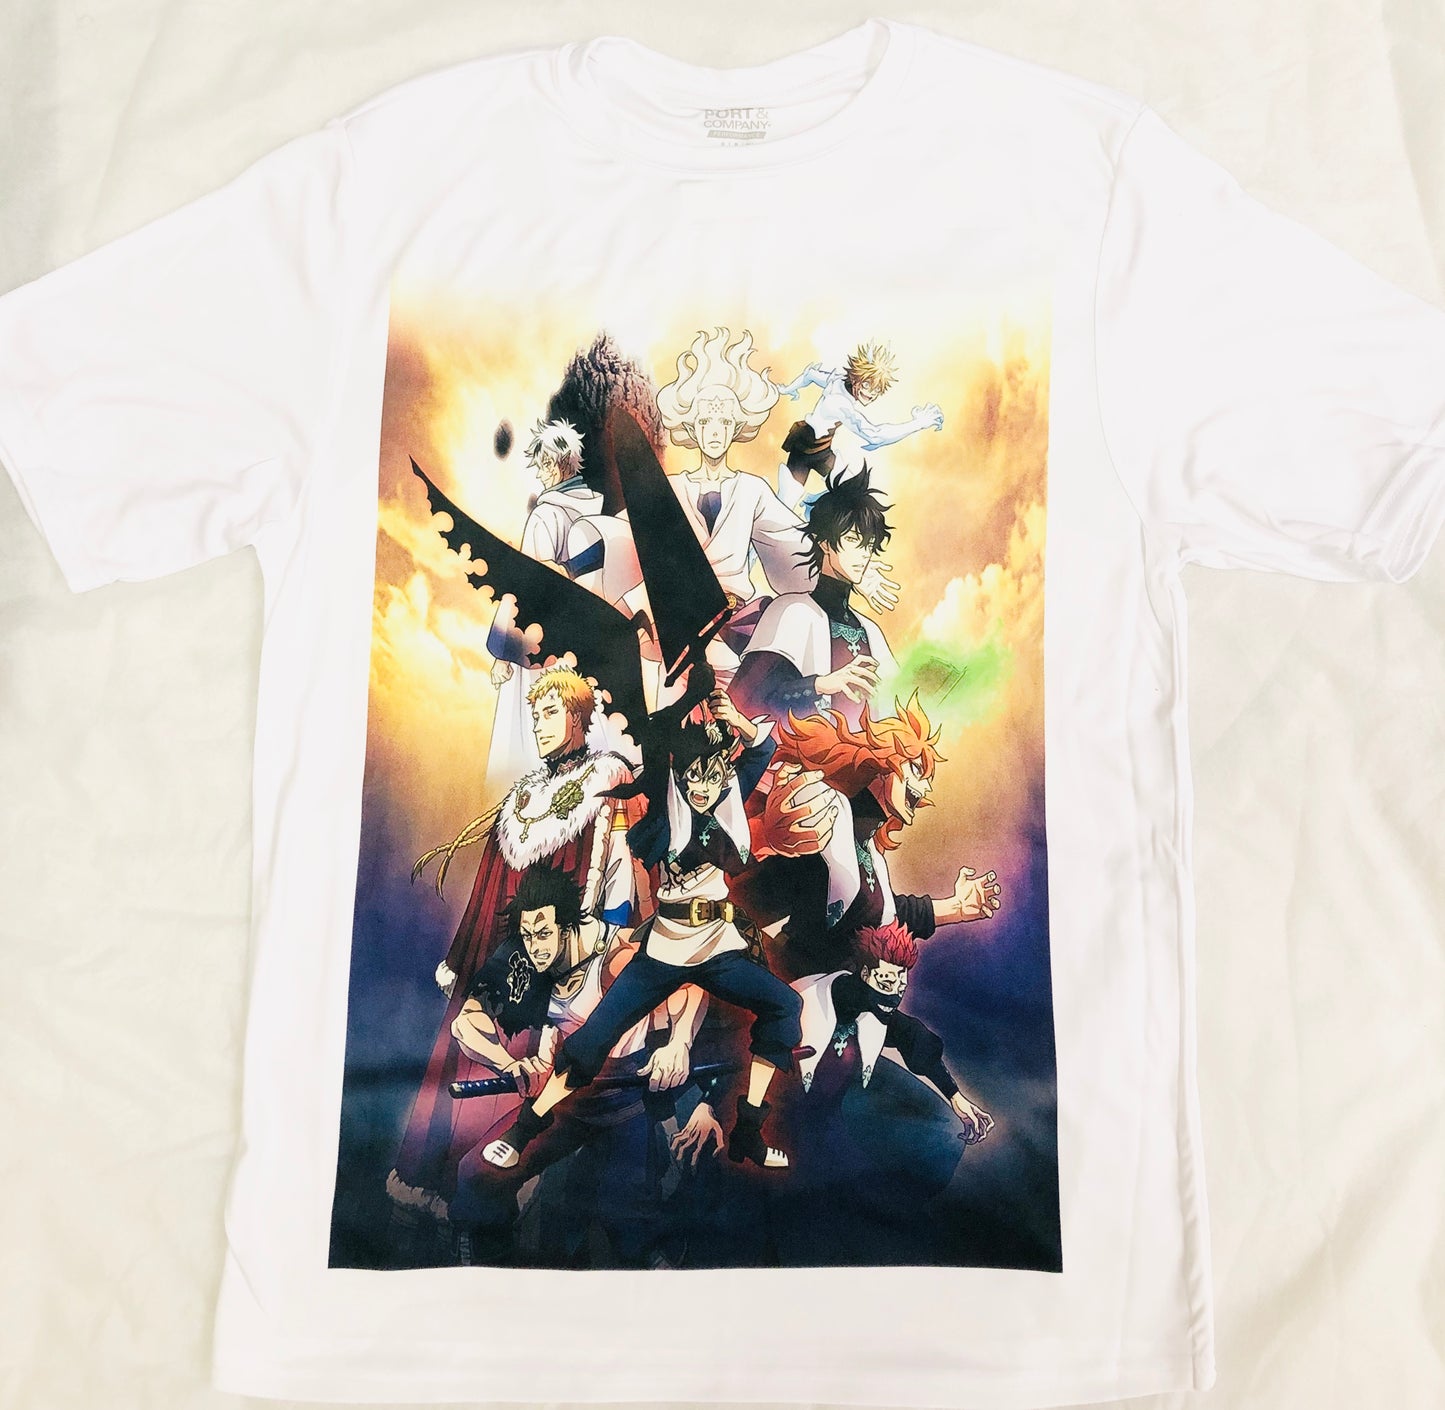 Anime Black Clover T-Shirt - Super Anime Store FREE SHIPPING FAST SHIPPING USA